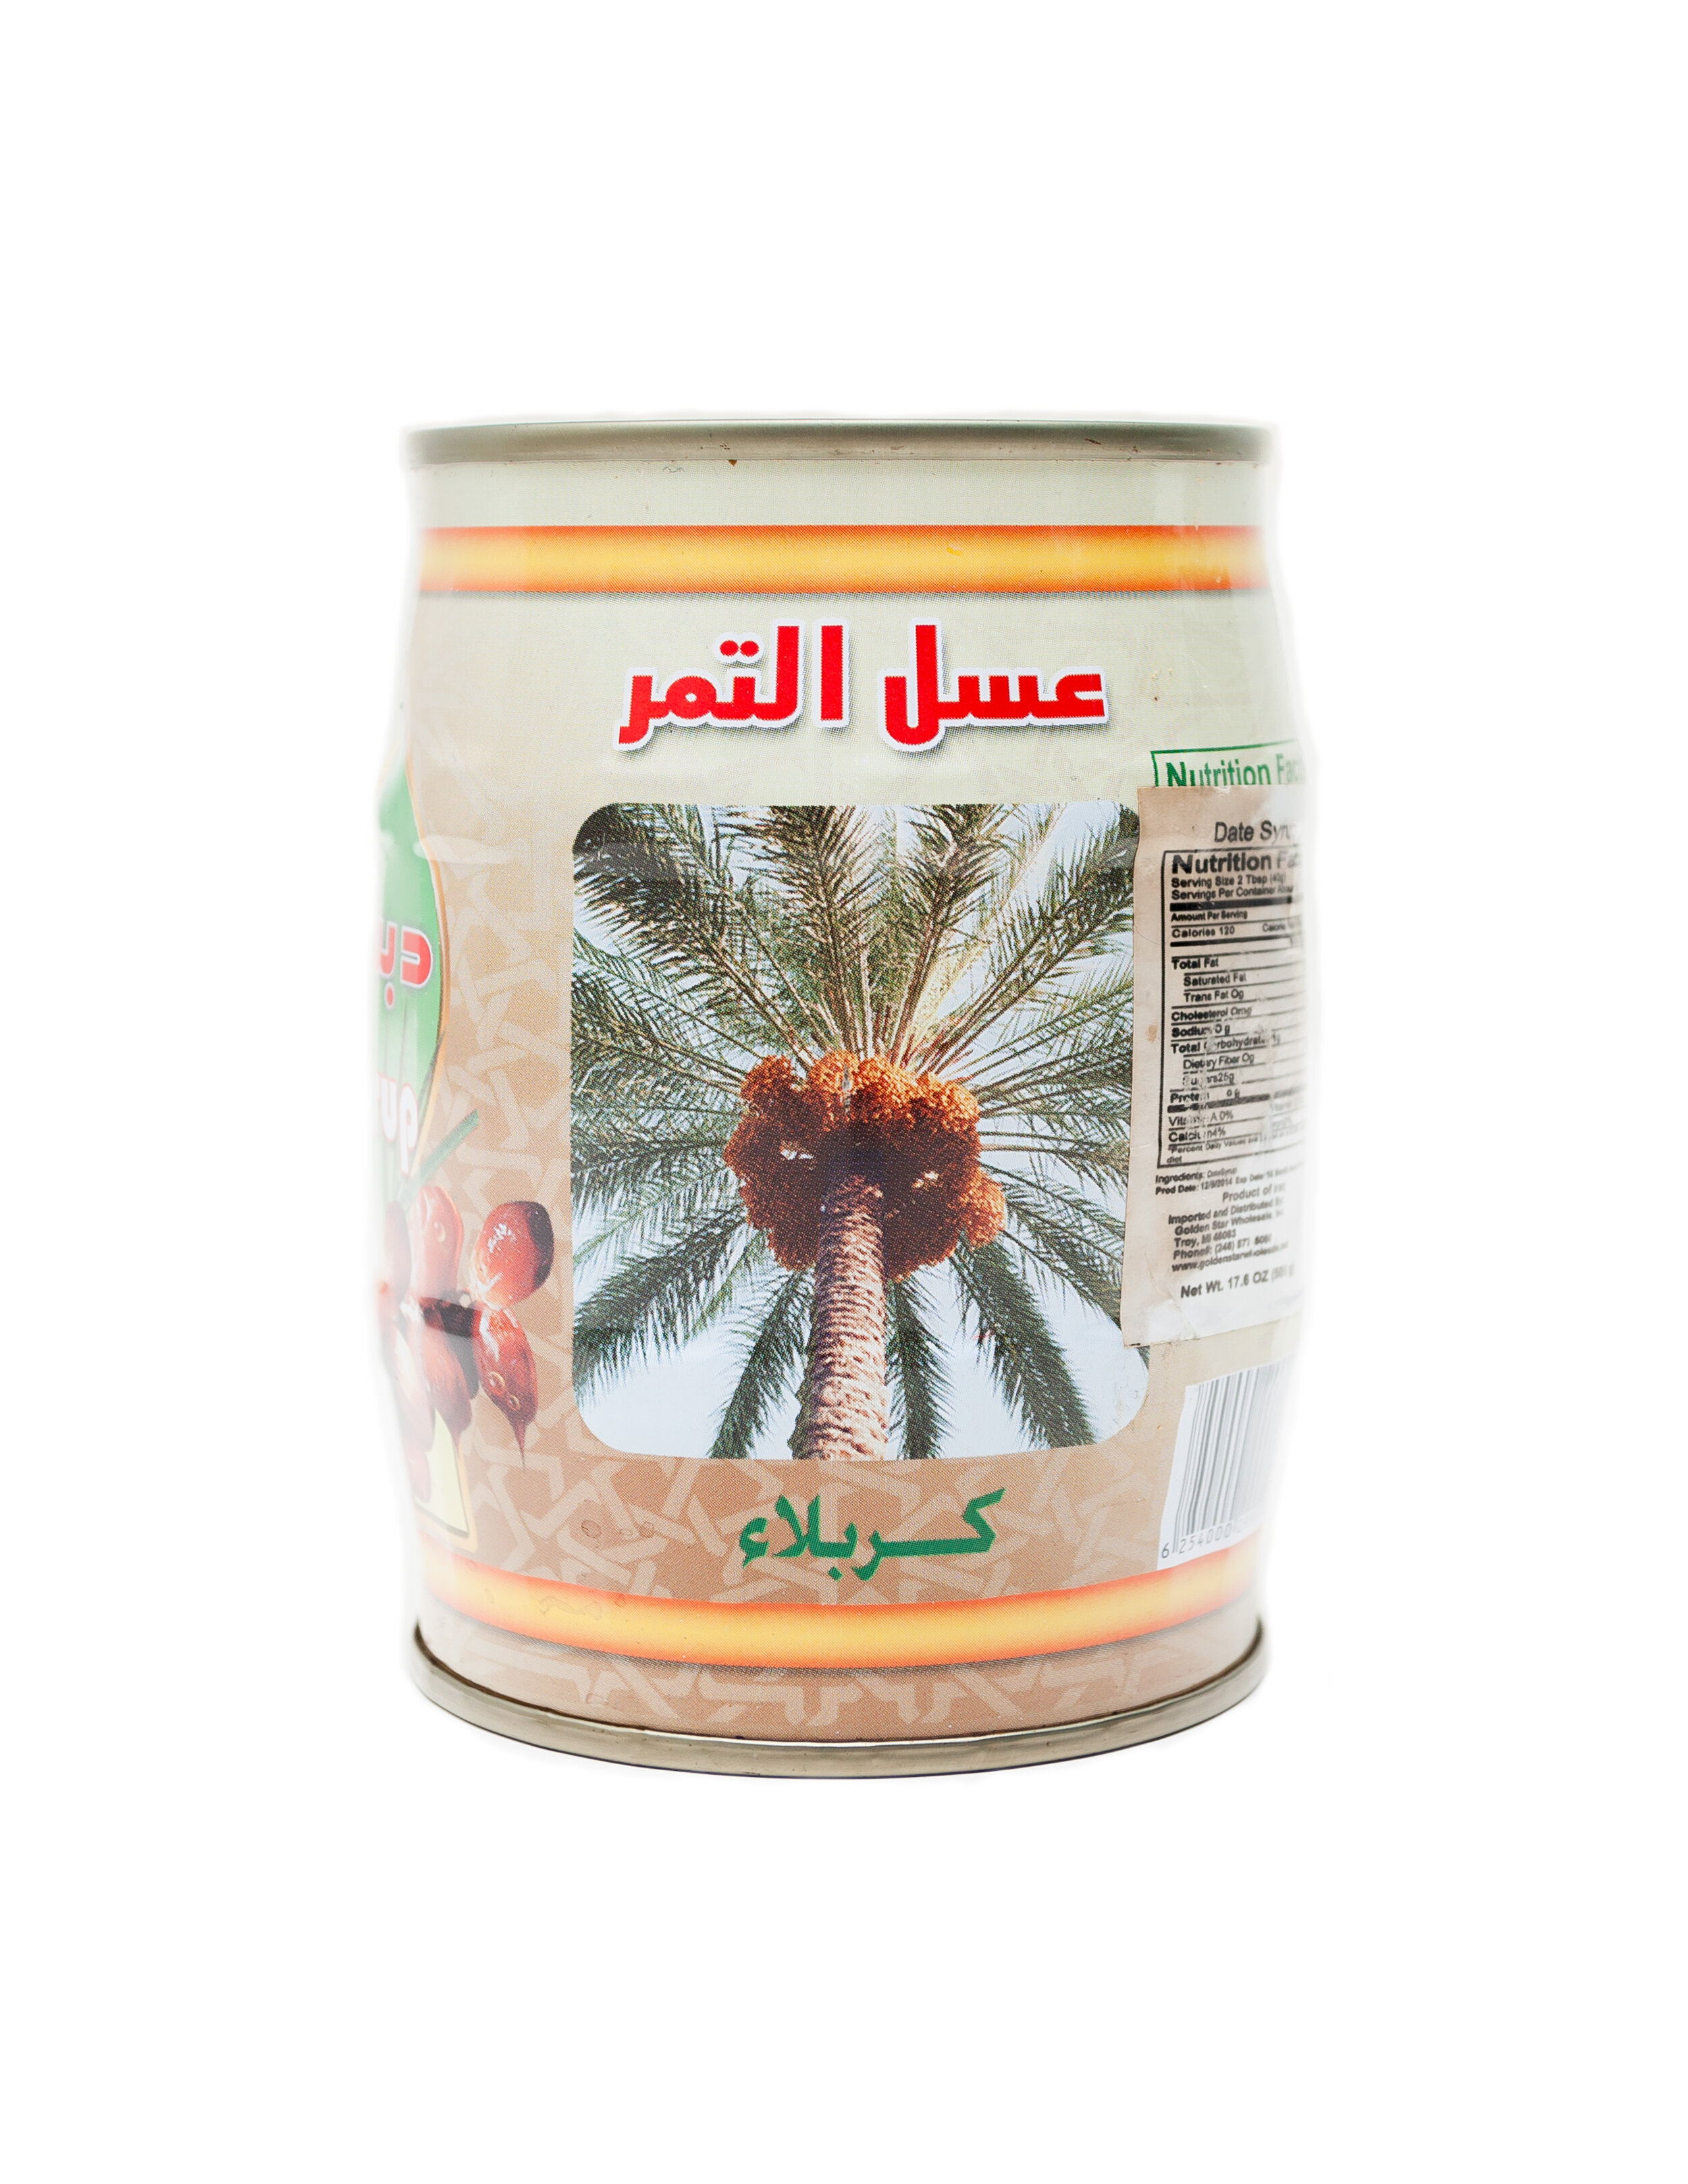  Iraqi dates were once considered the best in the world and constituted the country’s second largest export after oil. In the late 1970s, the Iraqi date industry listed over 30 million date palms in the country. By the end of the 2003 Iraq War, only 